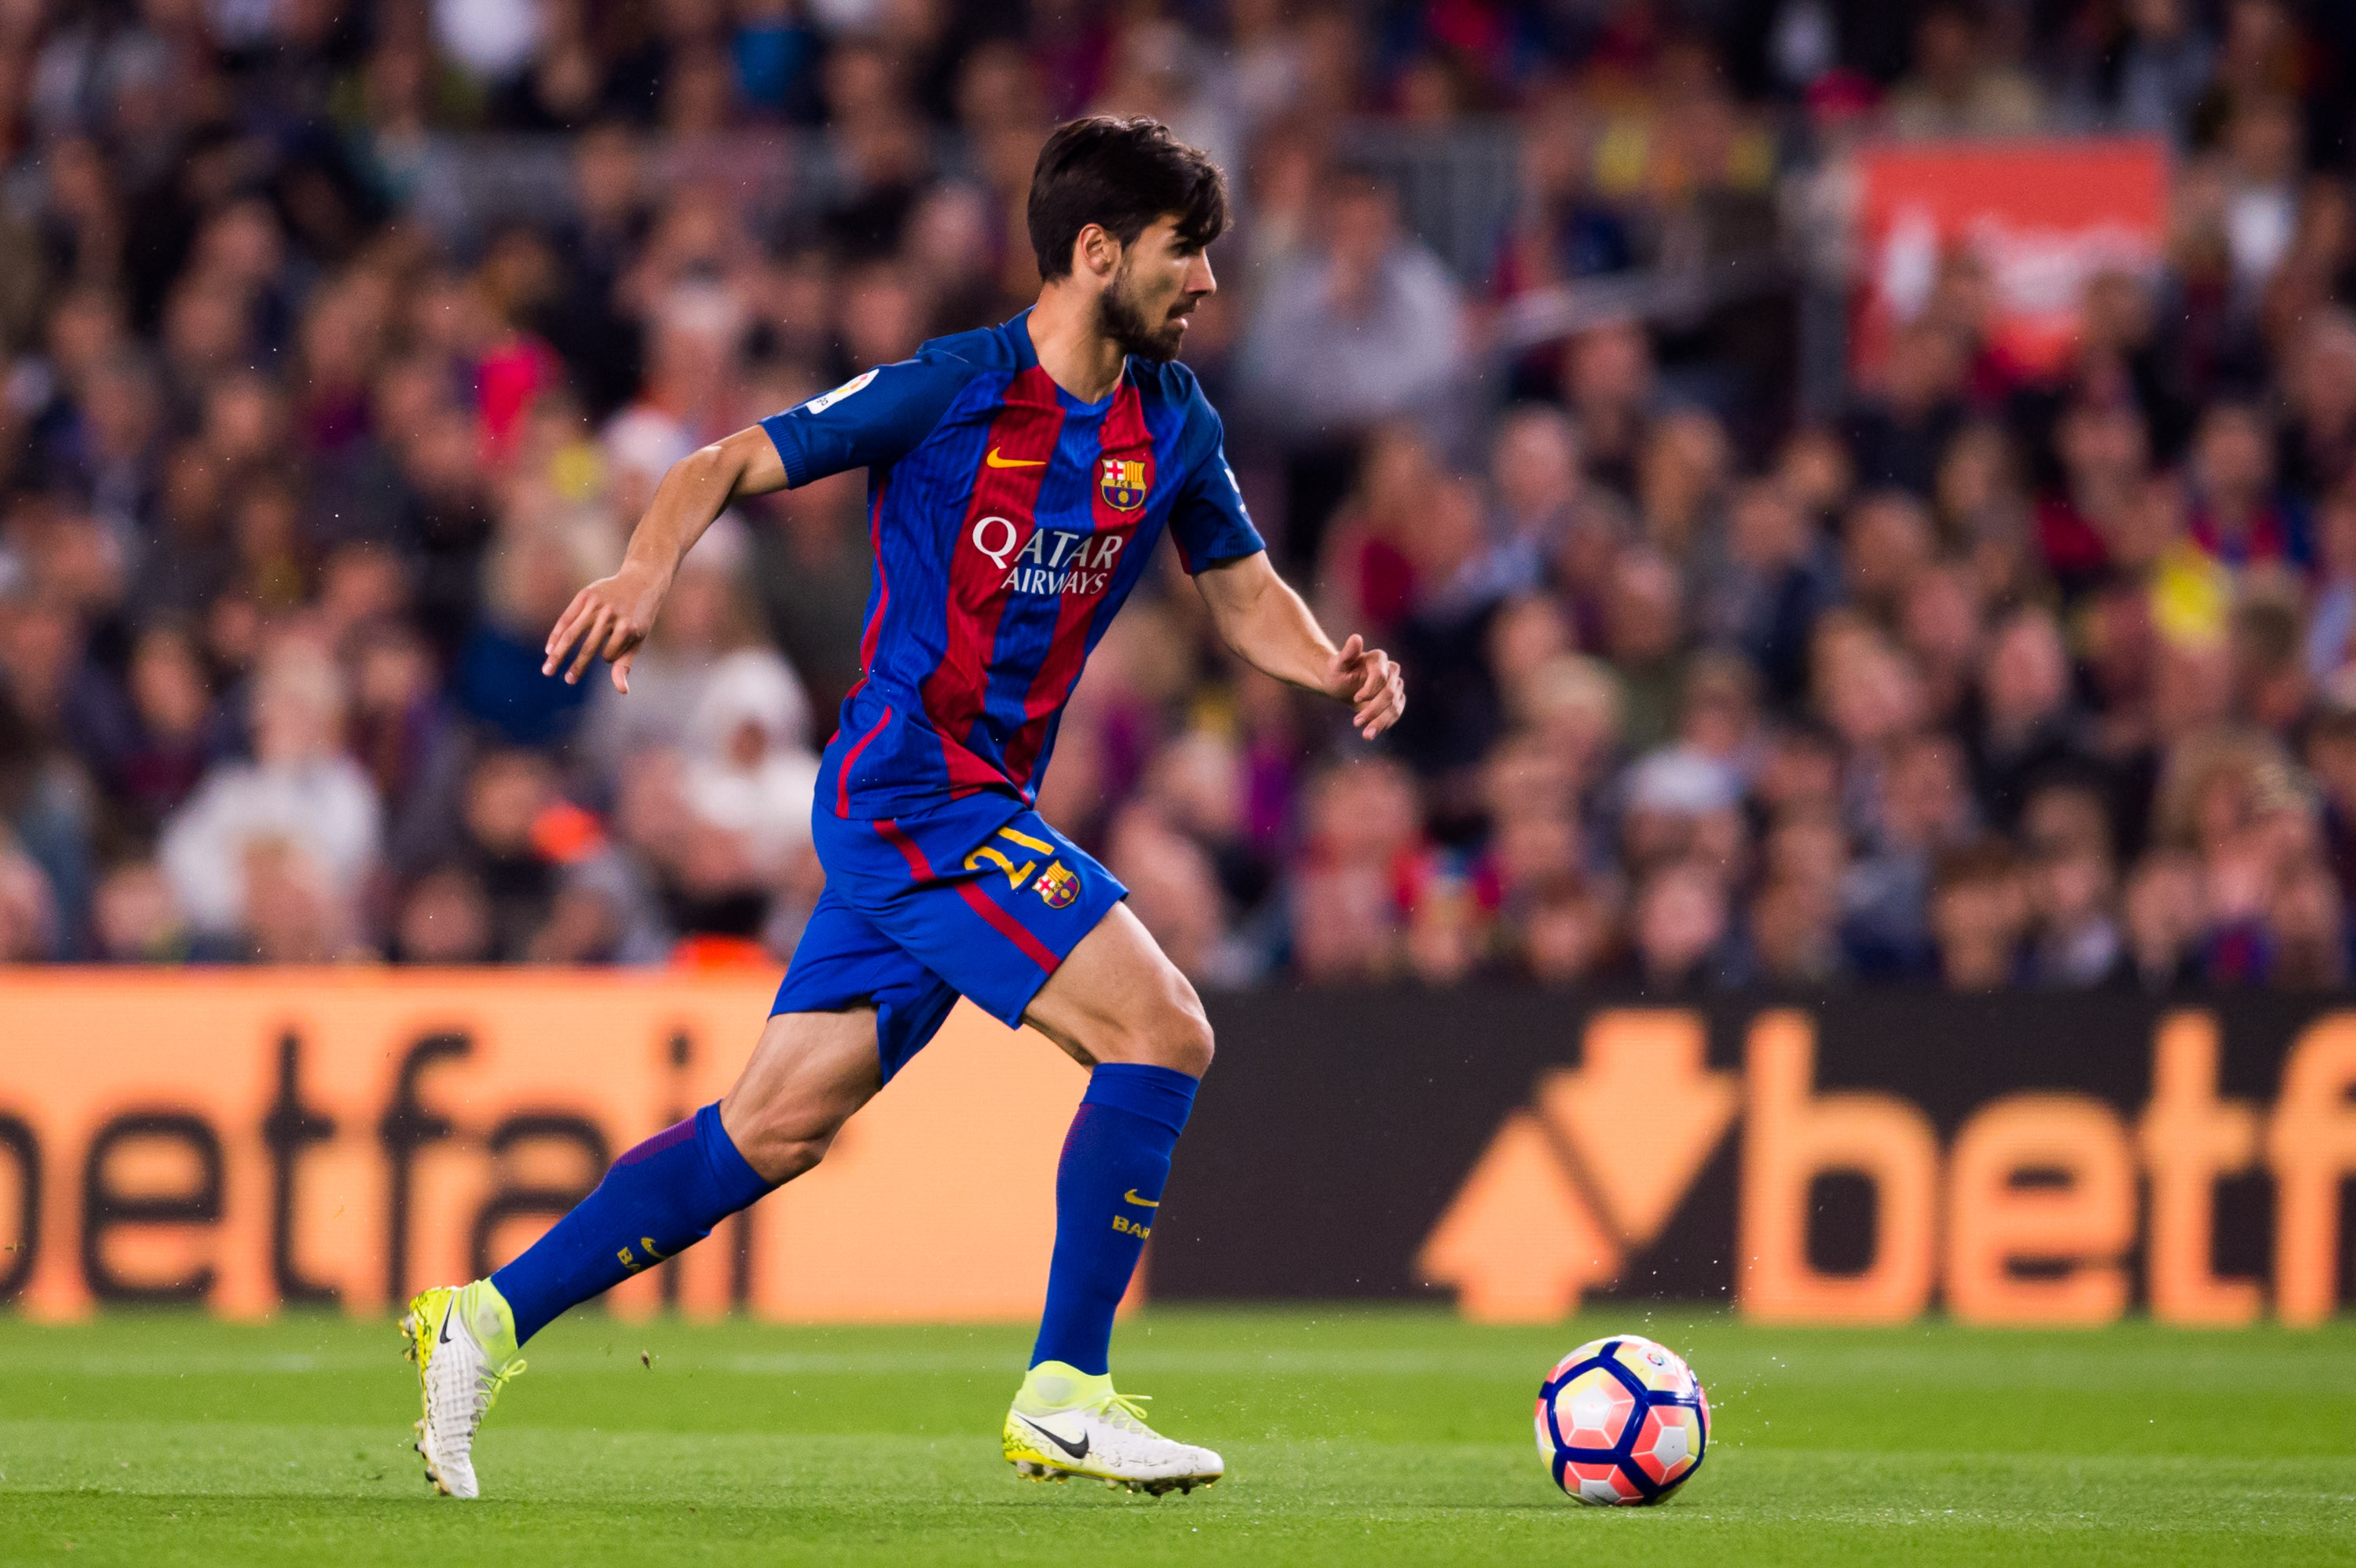 BARCELONA, SPAIN - APRIL 15: Andre Gomes of FC Barcelona conducts the ball during the La Liga match between FC Barcelona and Real Sociedad de Futbol at Camp Nou stadium on April 15, 2017 in Barcelona, Spain. (Photo by Alex Caparros/Getty Images)